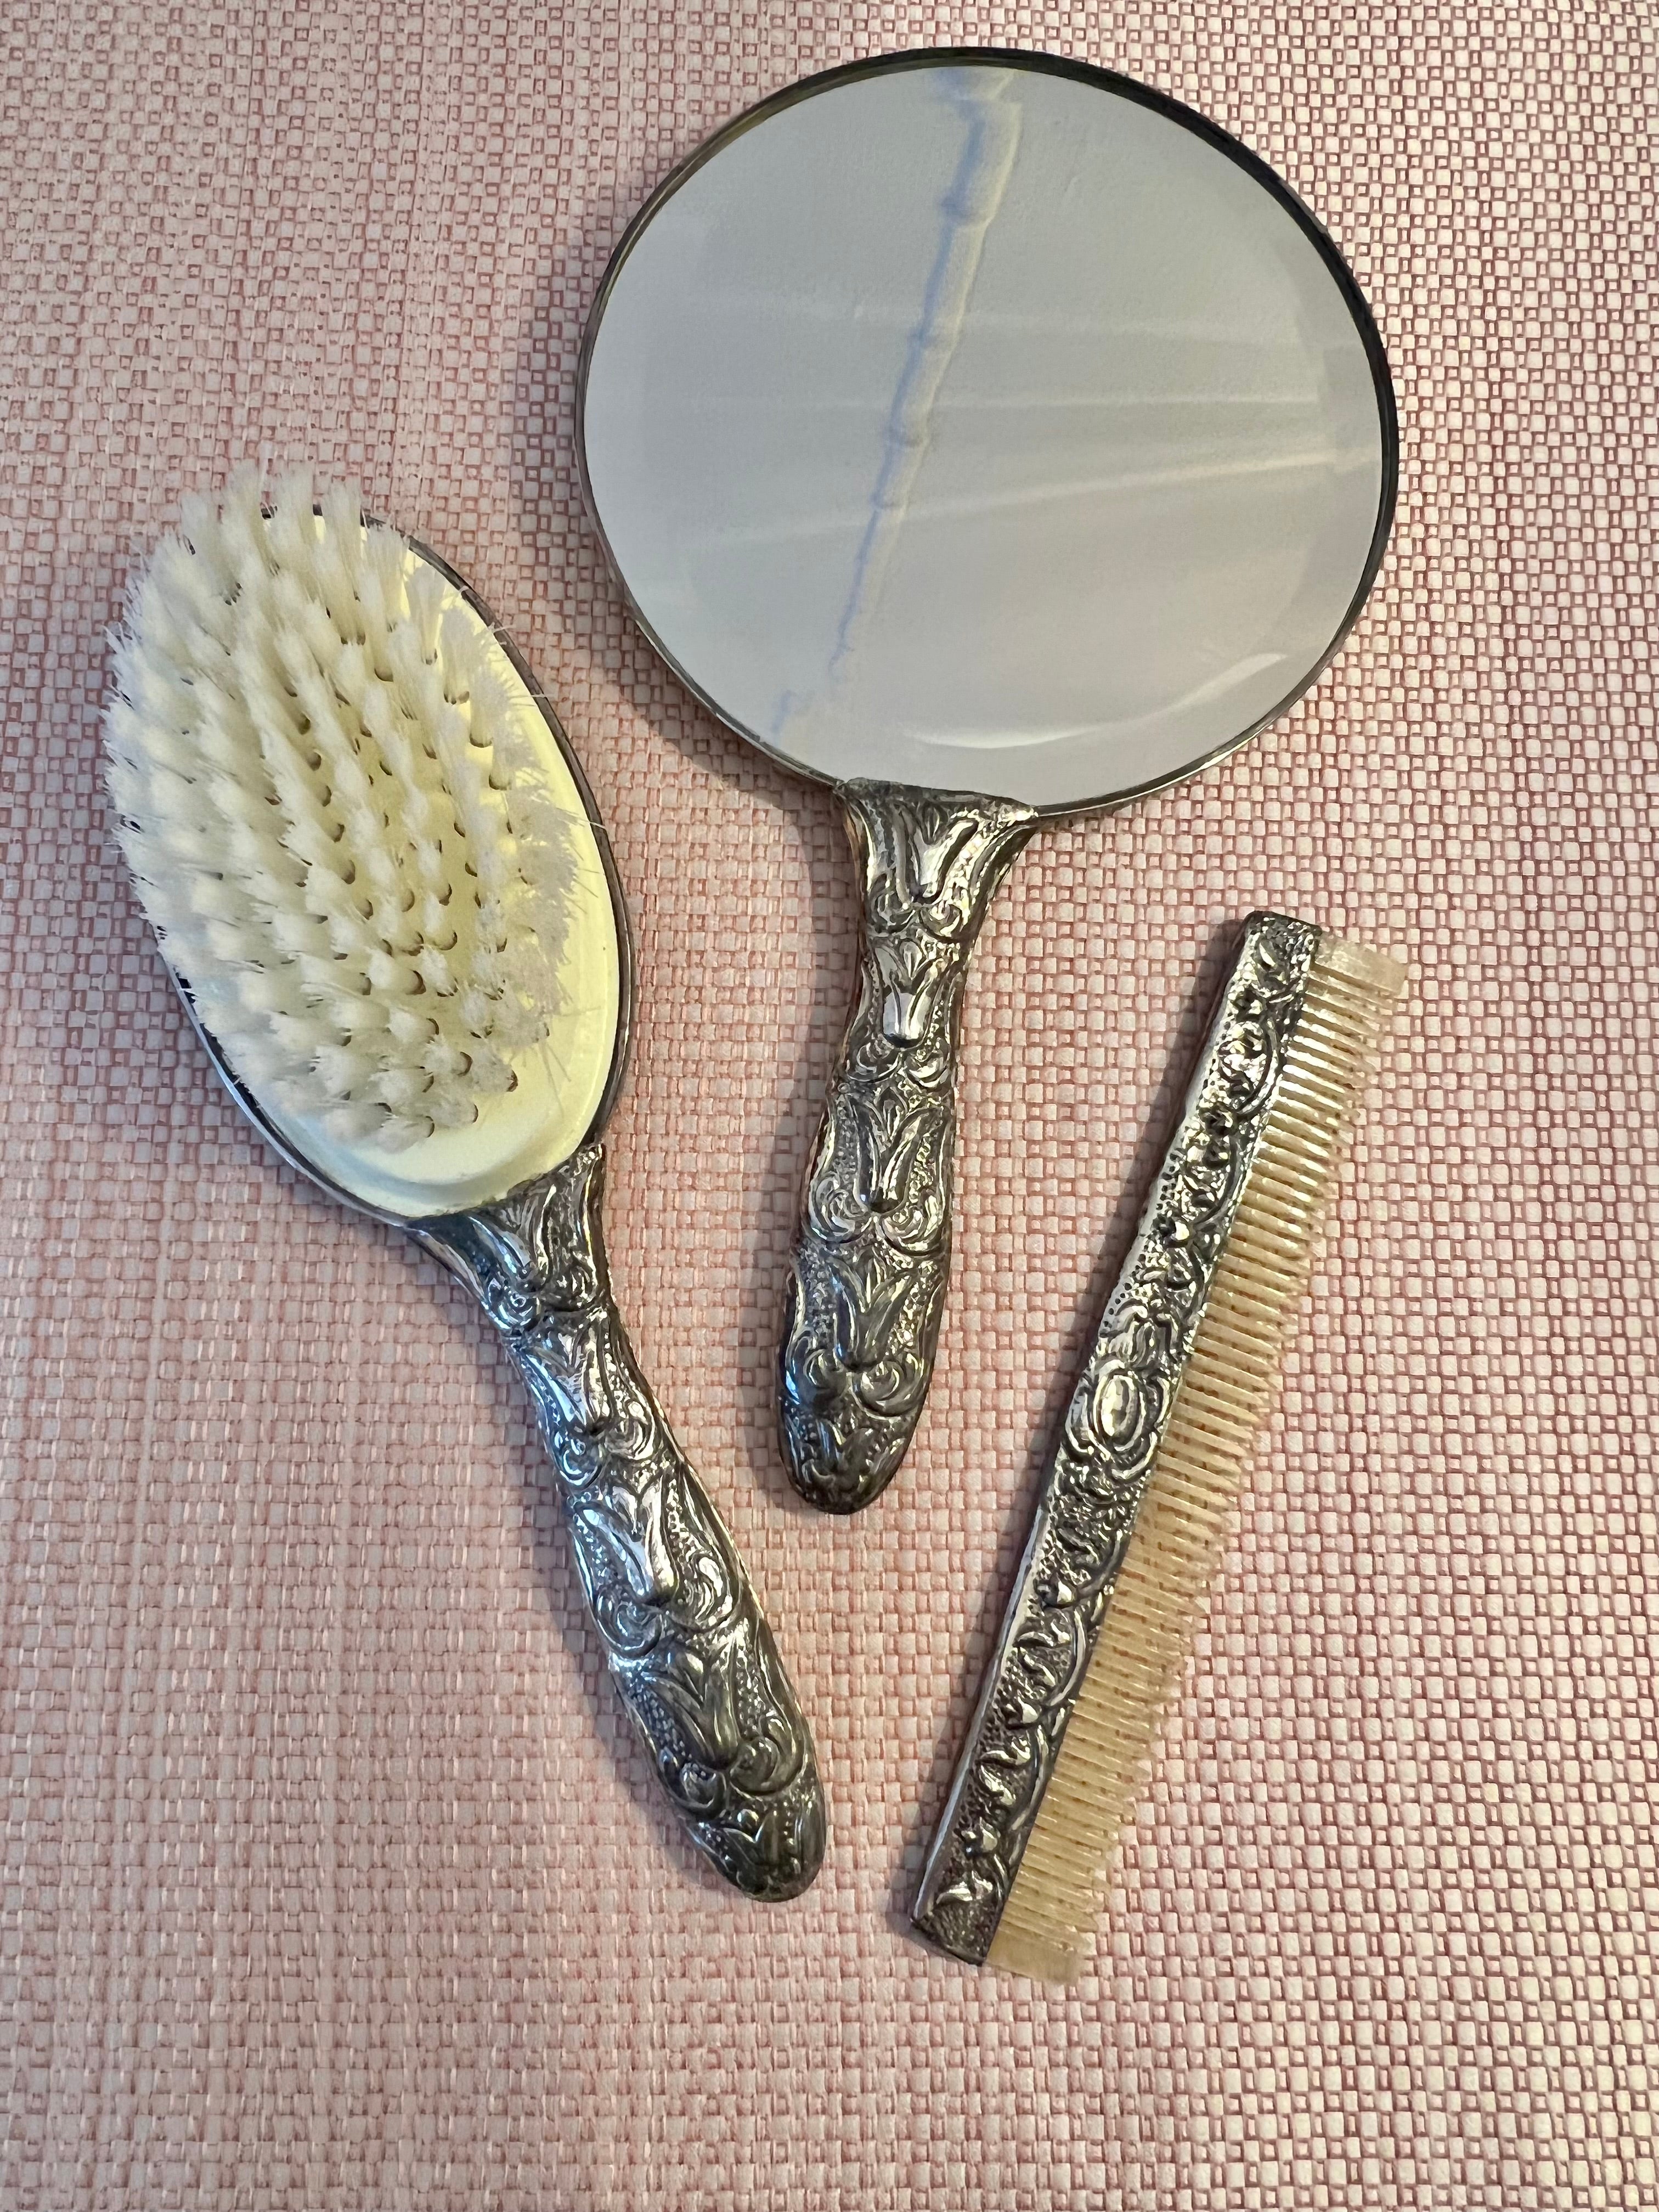 Vintage, never used, vanity set with a bristle brush, comb and mirror. Each piece fits neatly into a velvet carrying case with hinge closure. 

Each piece features an ornate silver plate repousse brocade. Brush and mirror have been engraved with